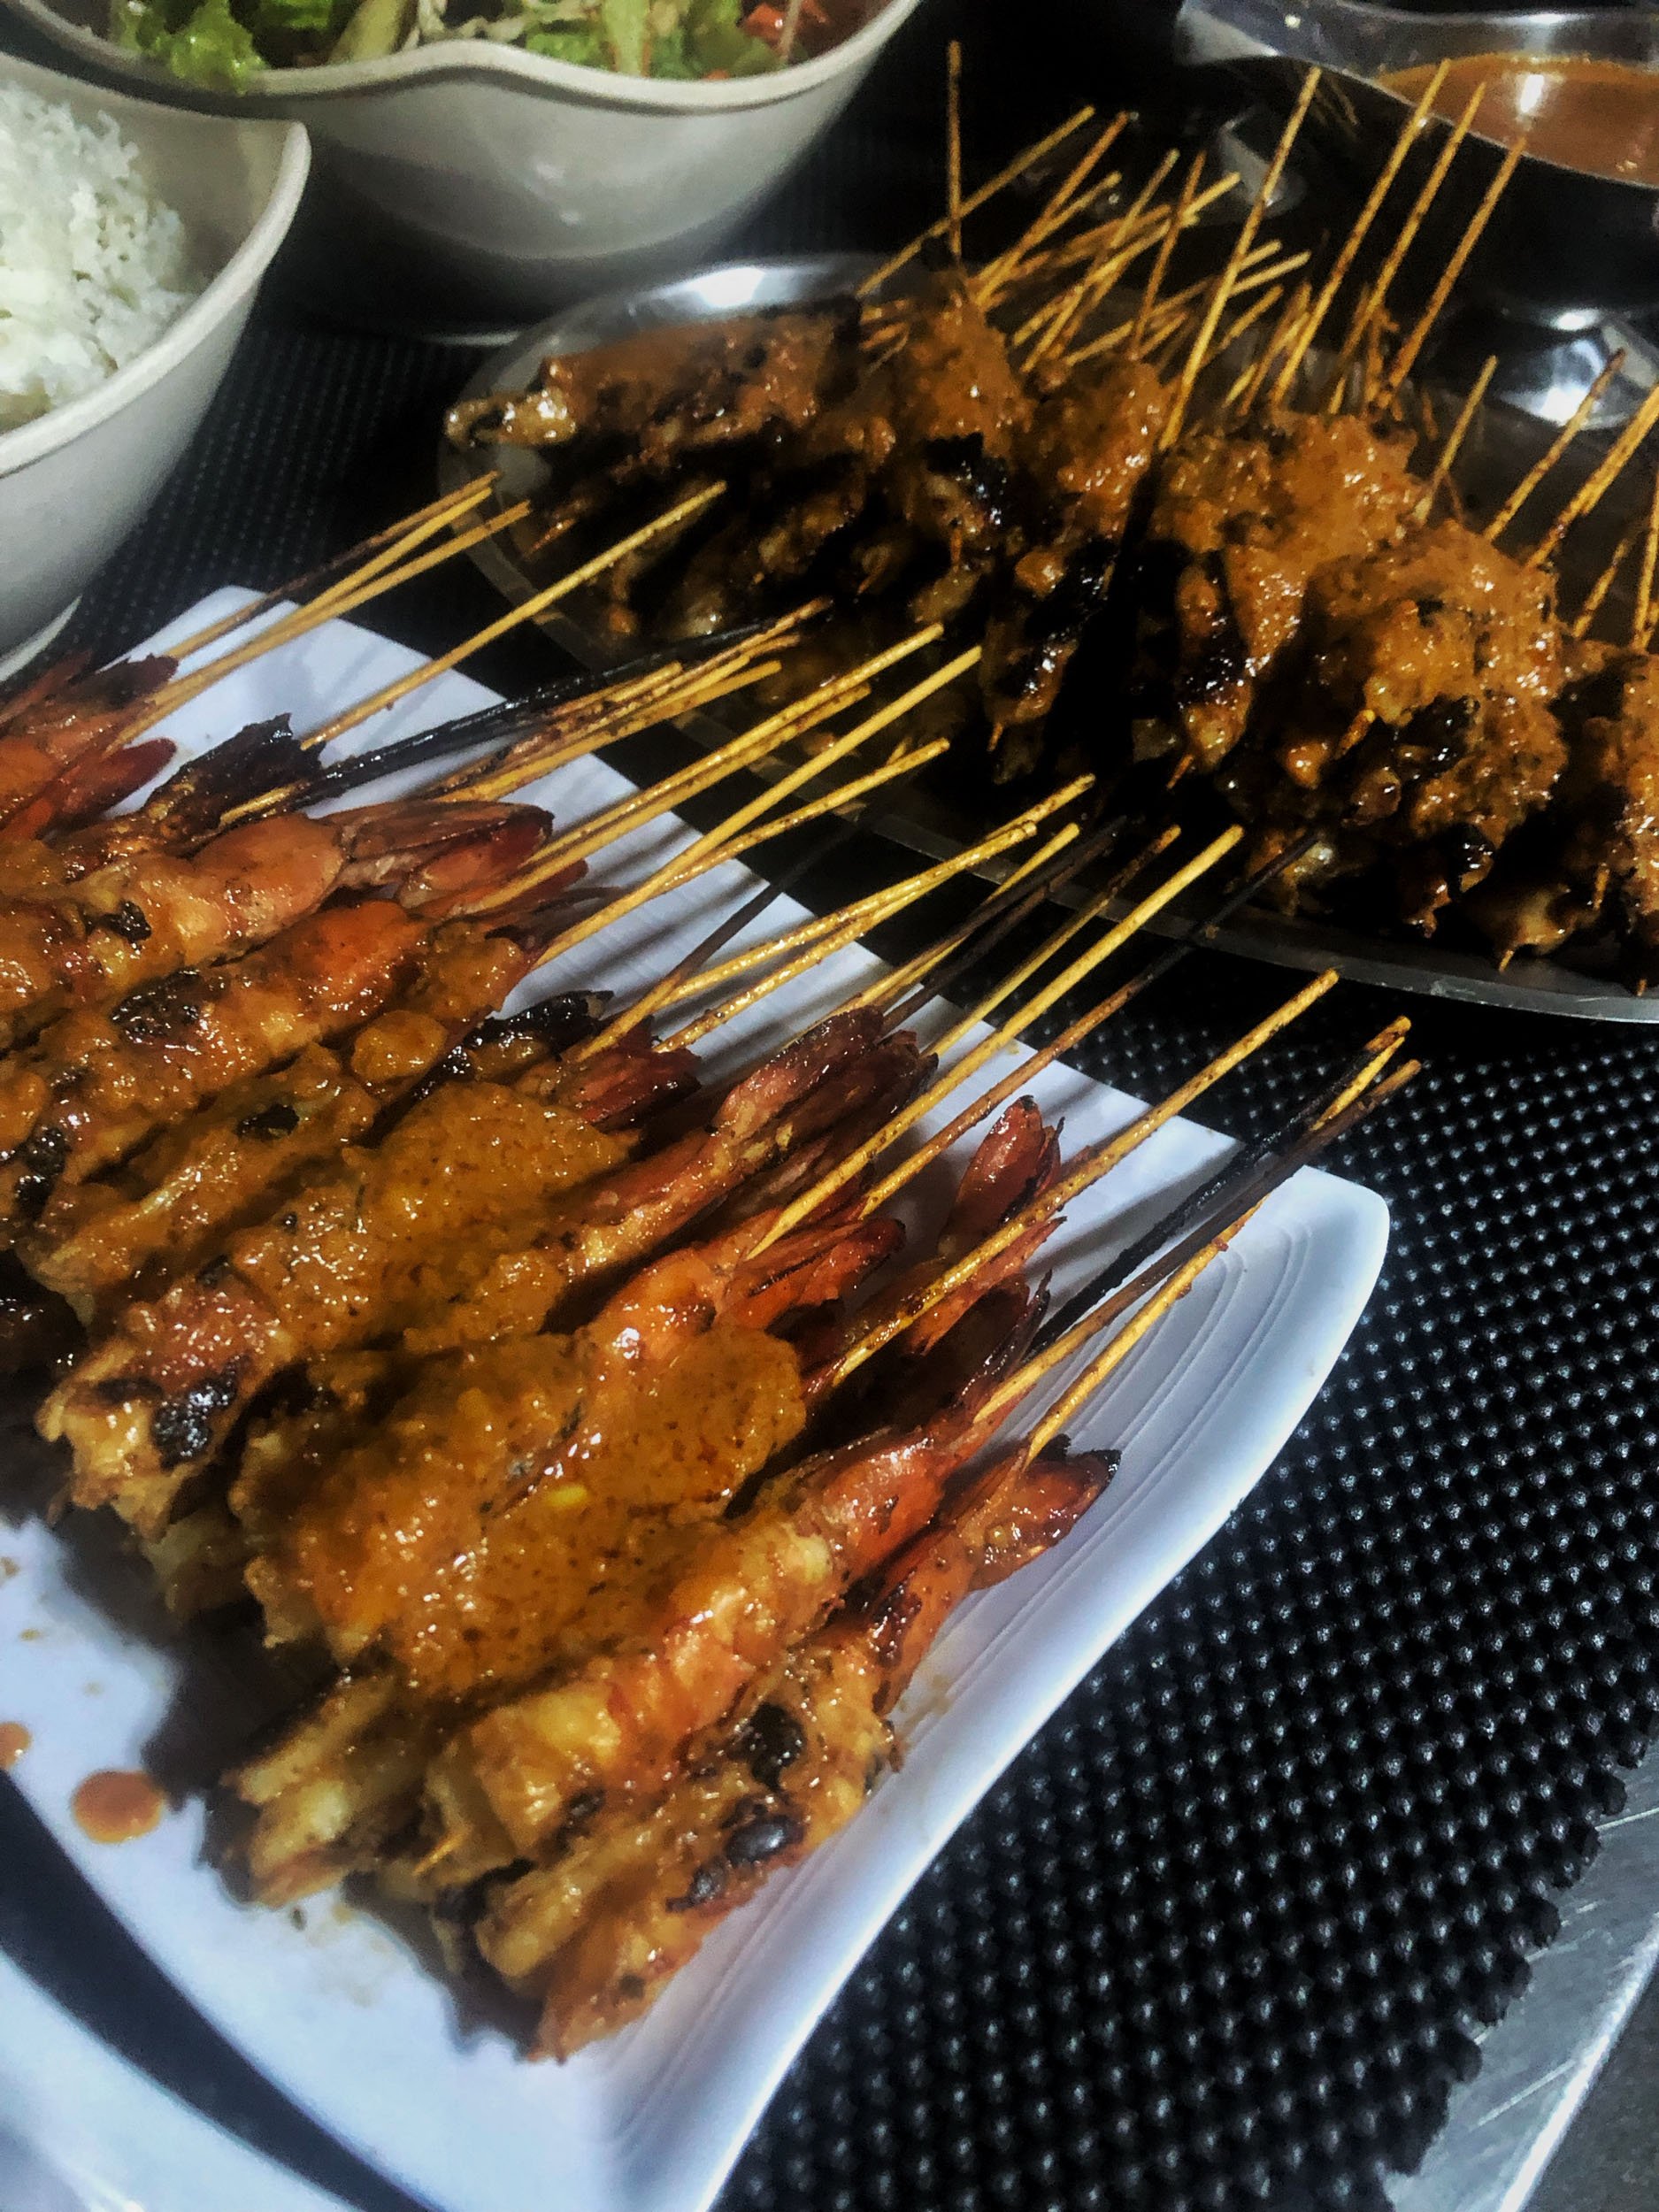 You haven't been to Indo unless you eat sate